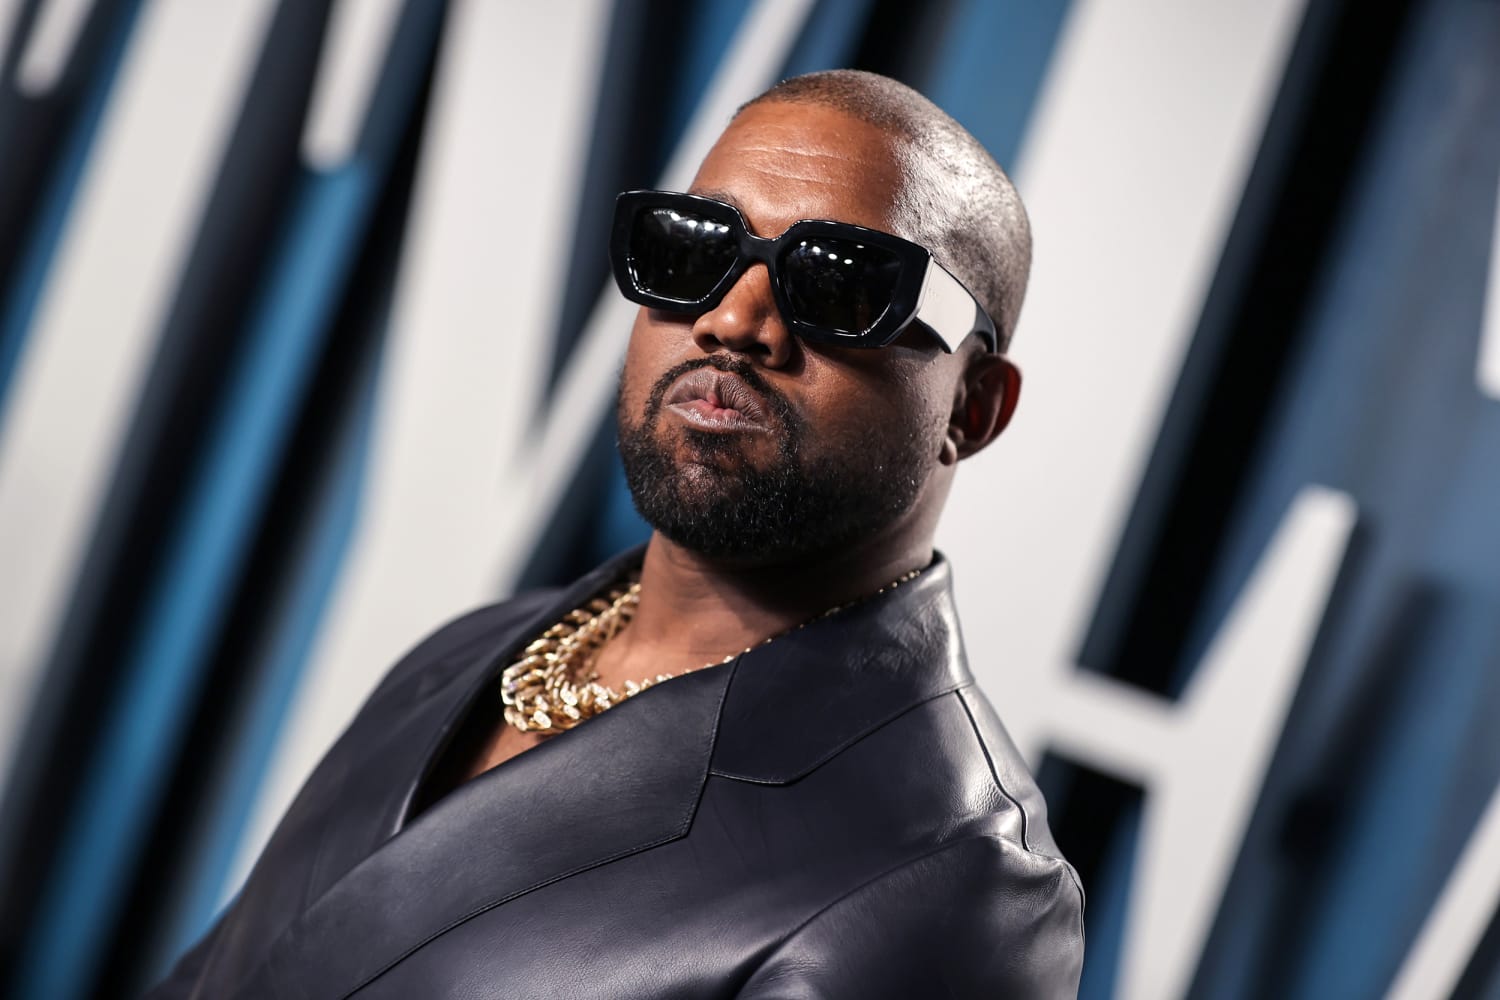 Ye apparel company Yeezy to pay $950,000 in lawsuit settlement